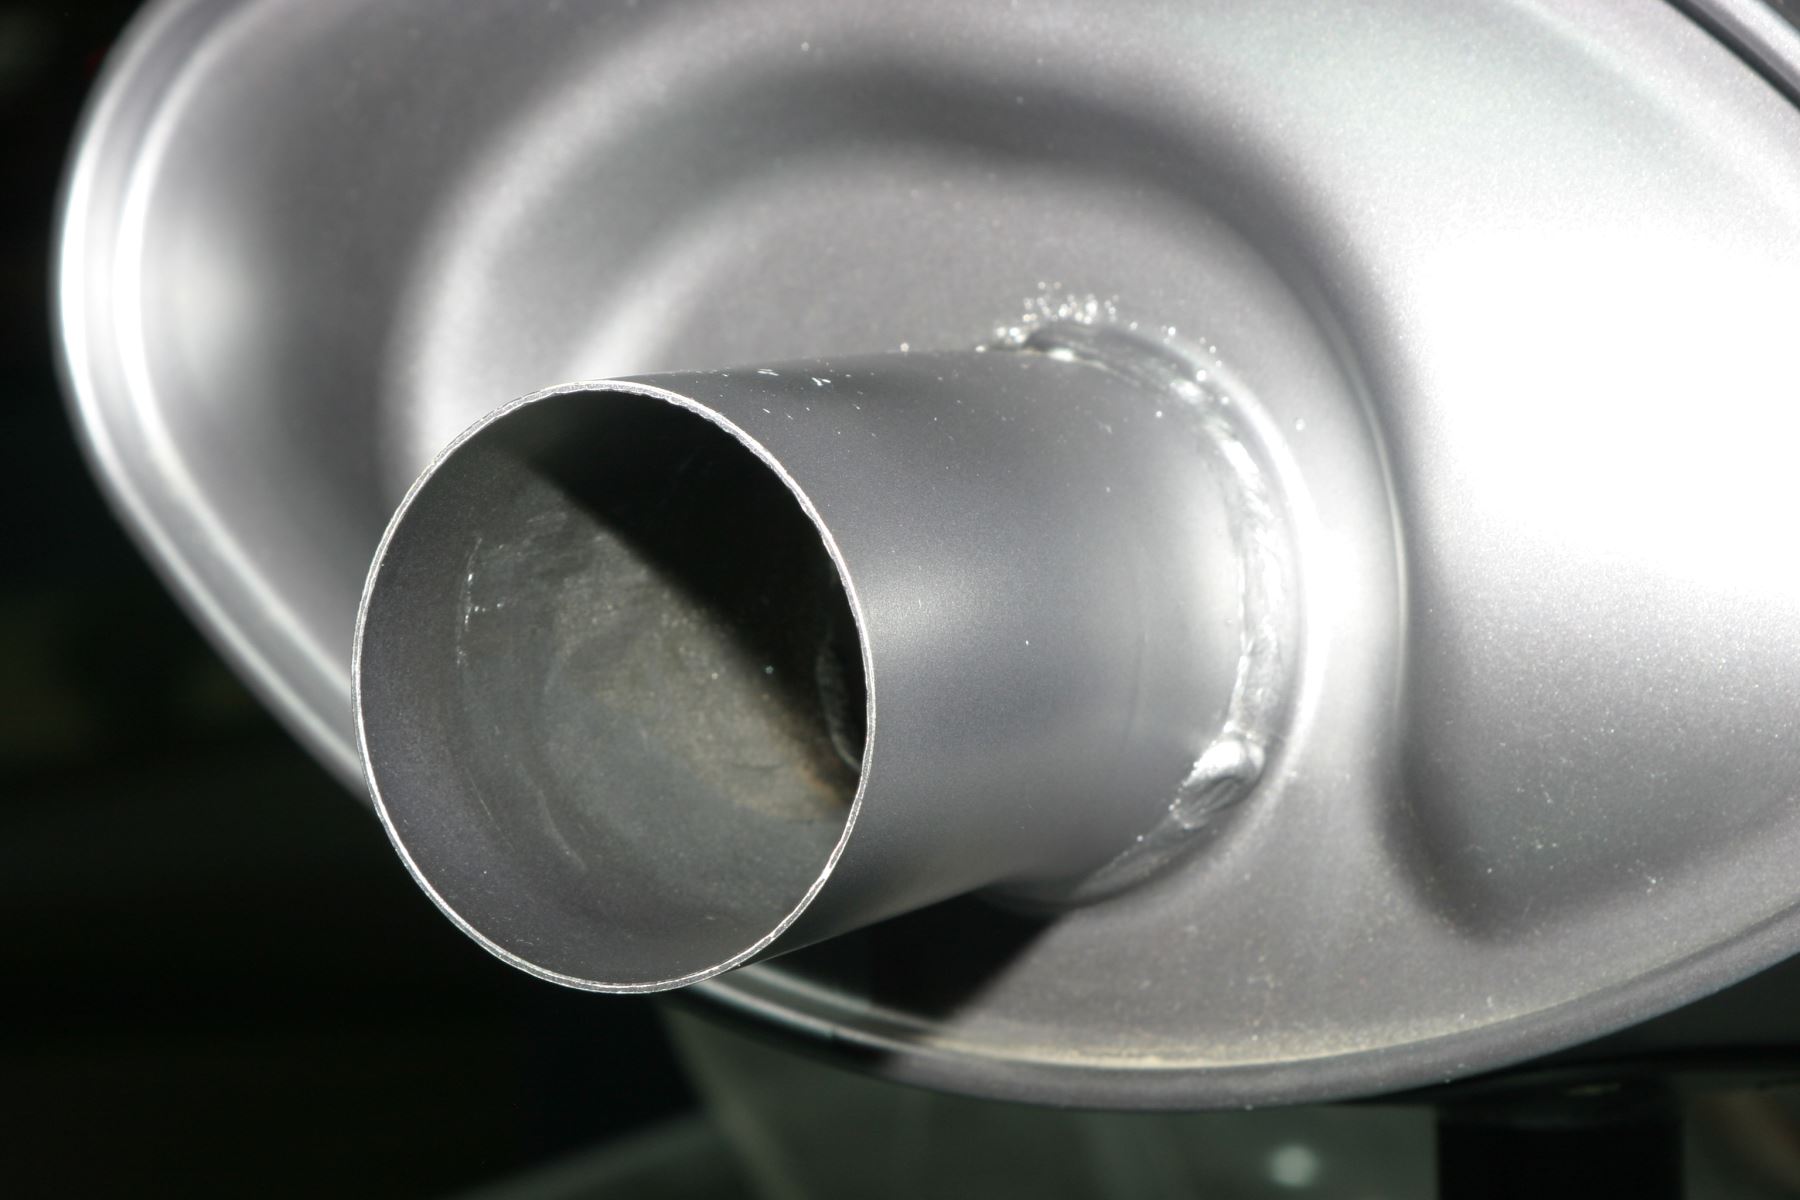 What You Need to Know About Your Vehicle's Exhaust System